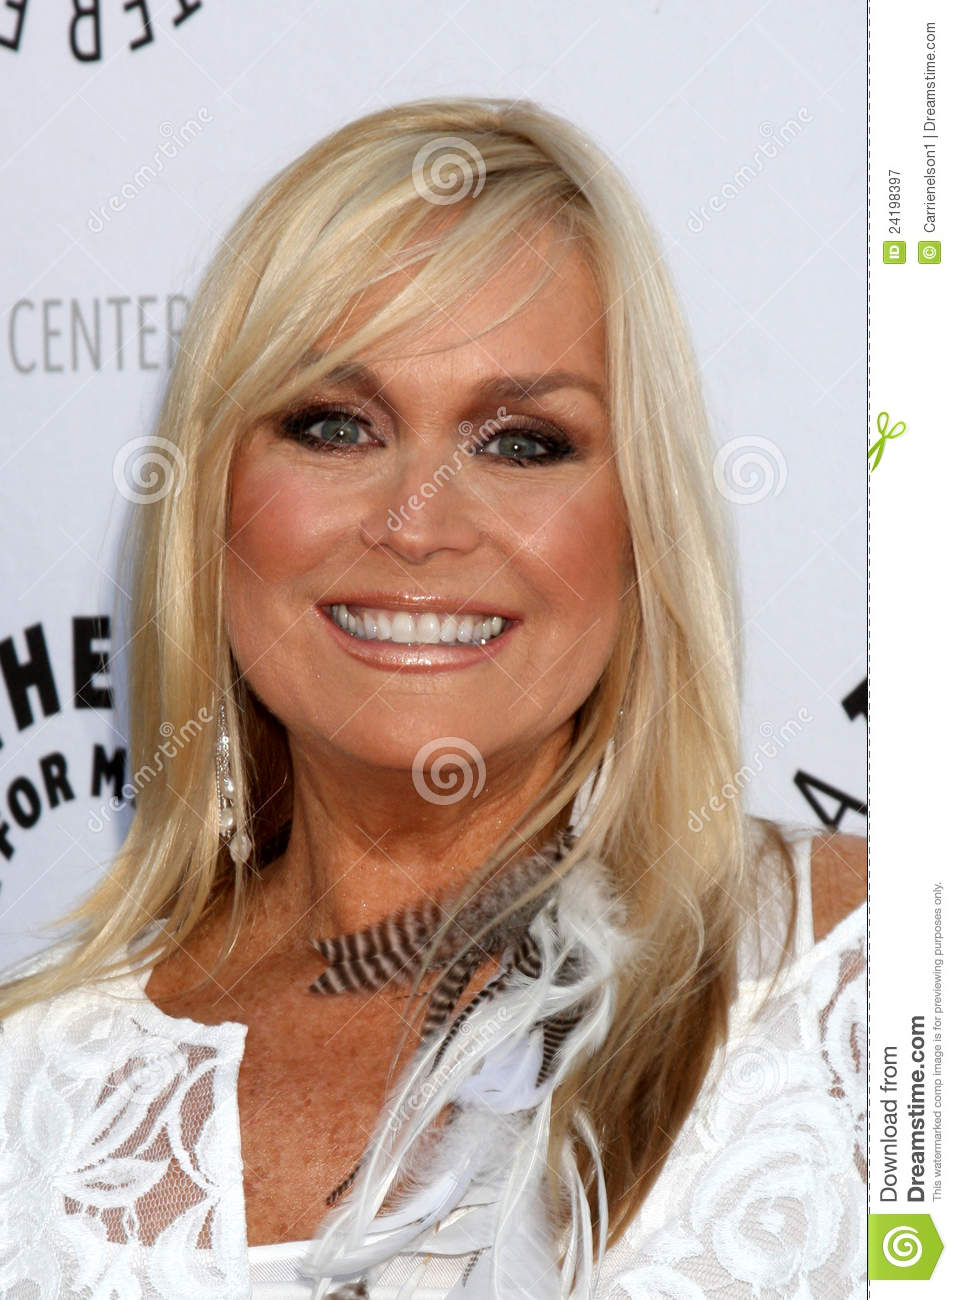 catherine-hickland-images